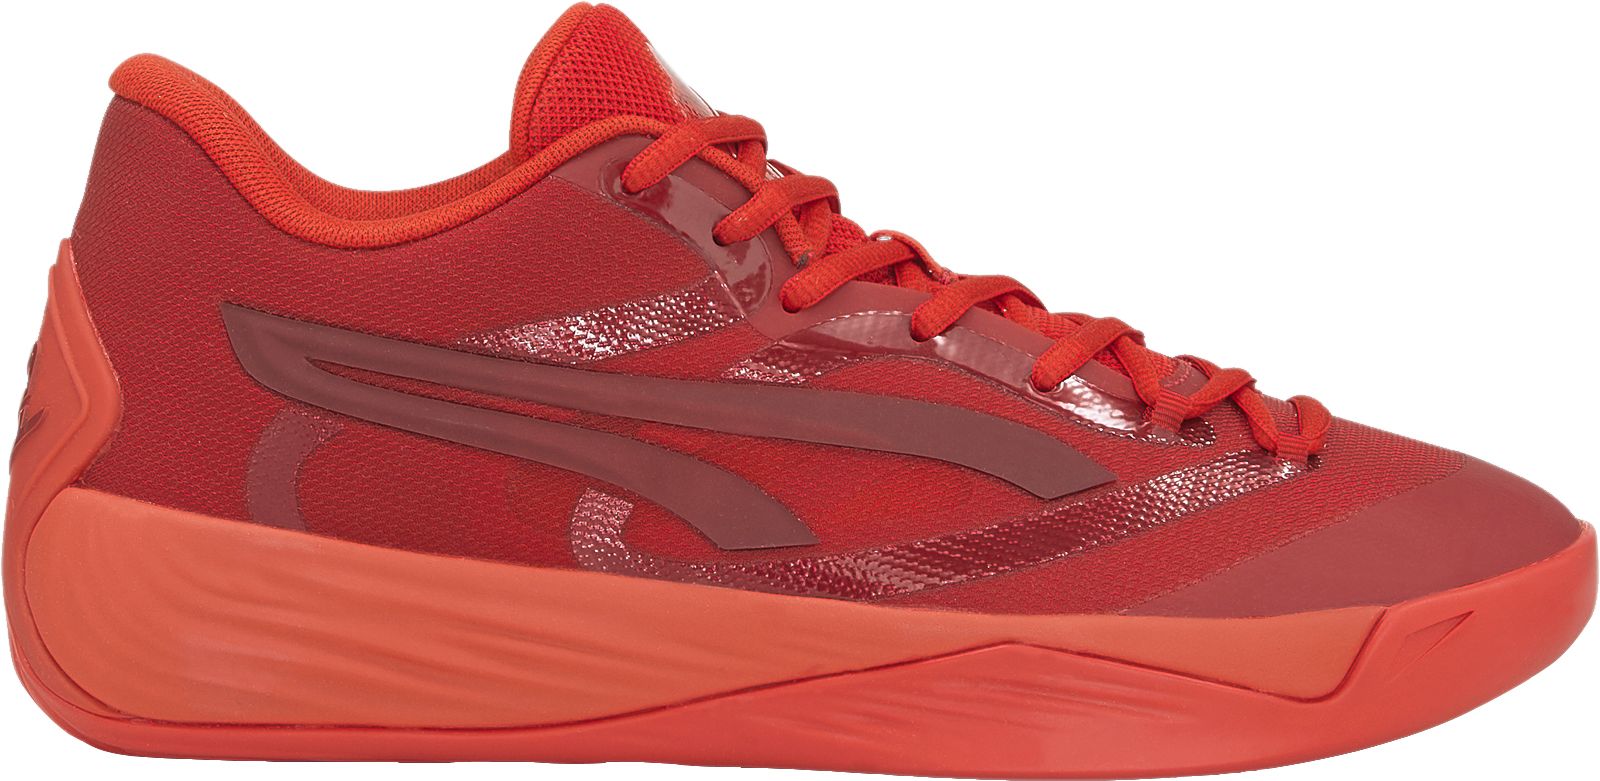 Puma Women's Stewie 2 Basketball Shoes (Red) $23.38 + Free Shipping on $65+